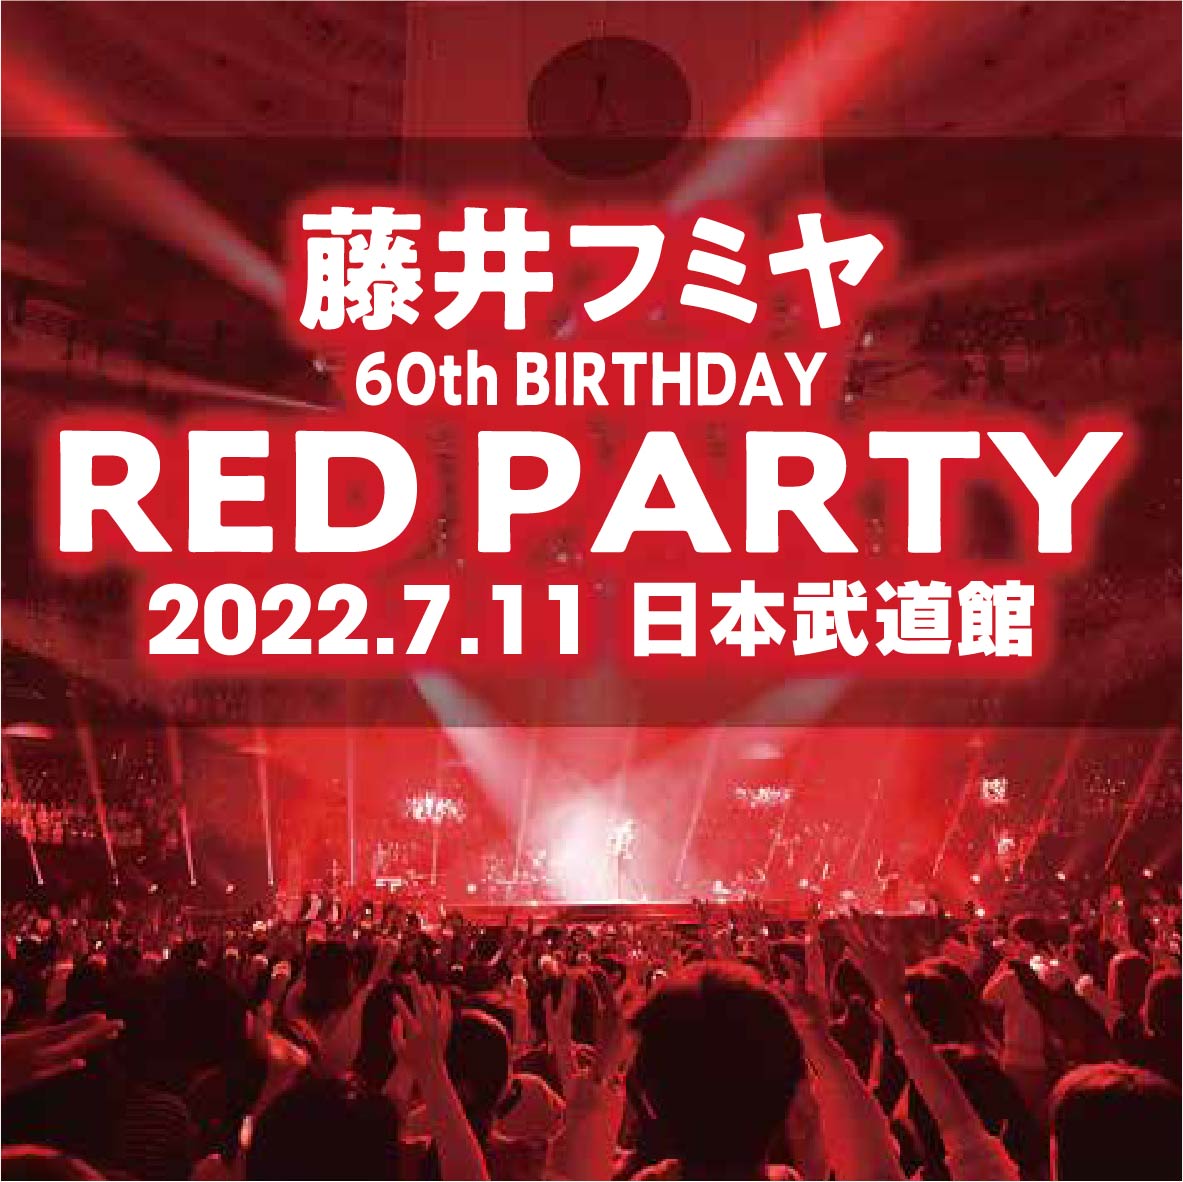 FUMIYA FUJII 60th BIRTHDAY RED PARTY 日本武道館 - ON THE LINE